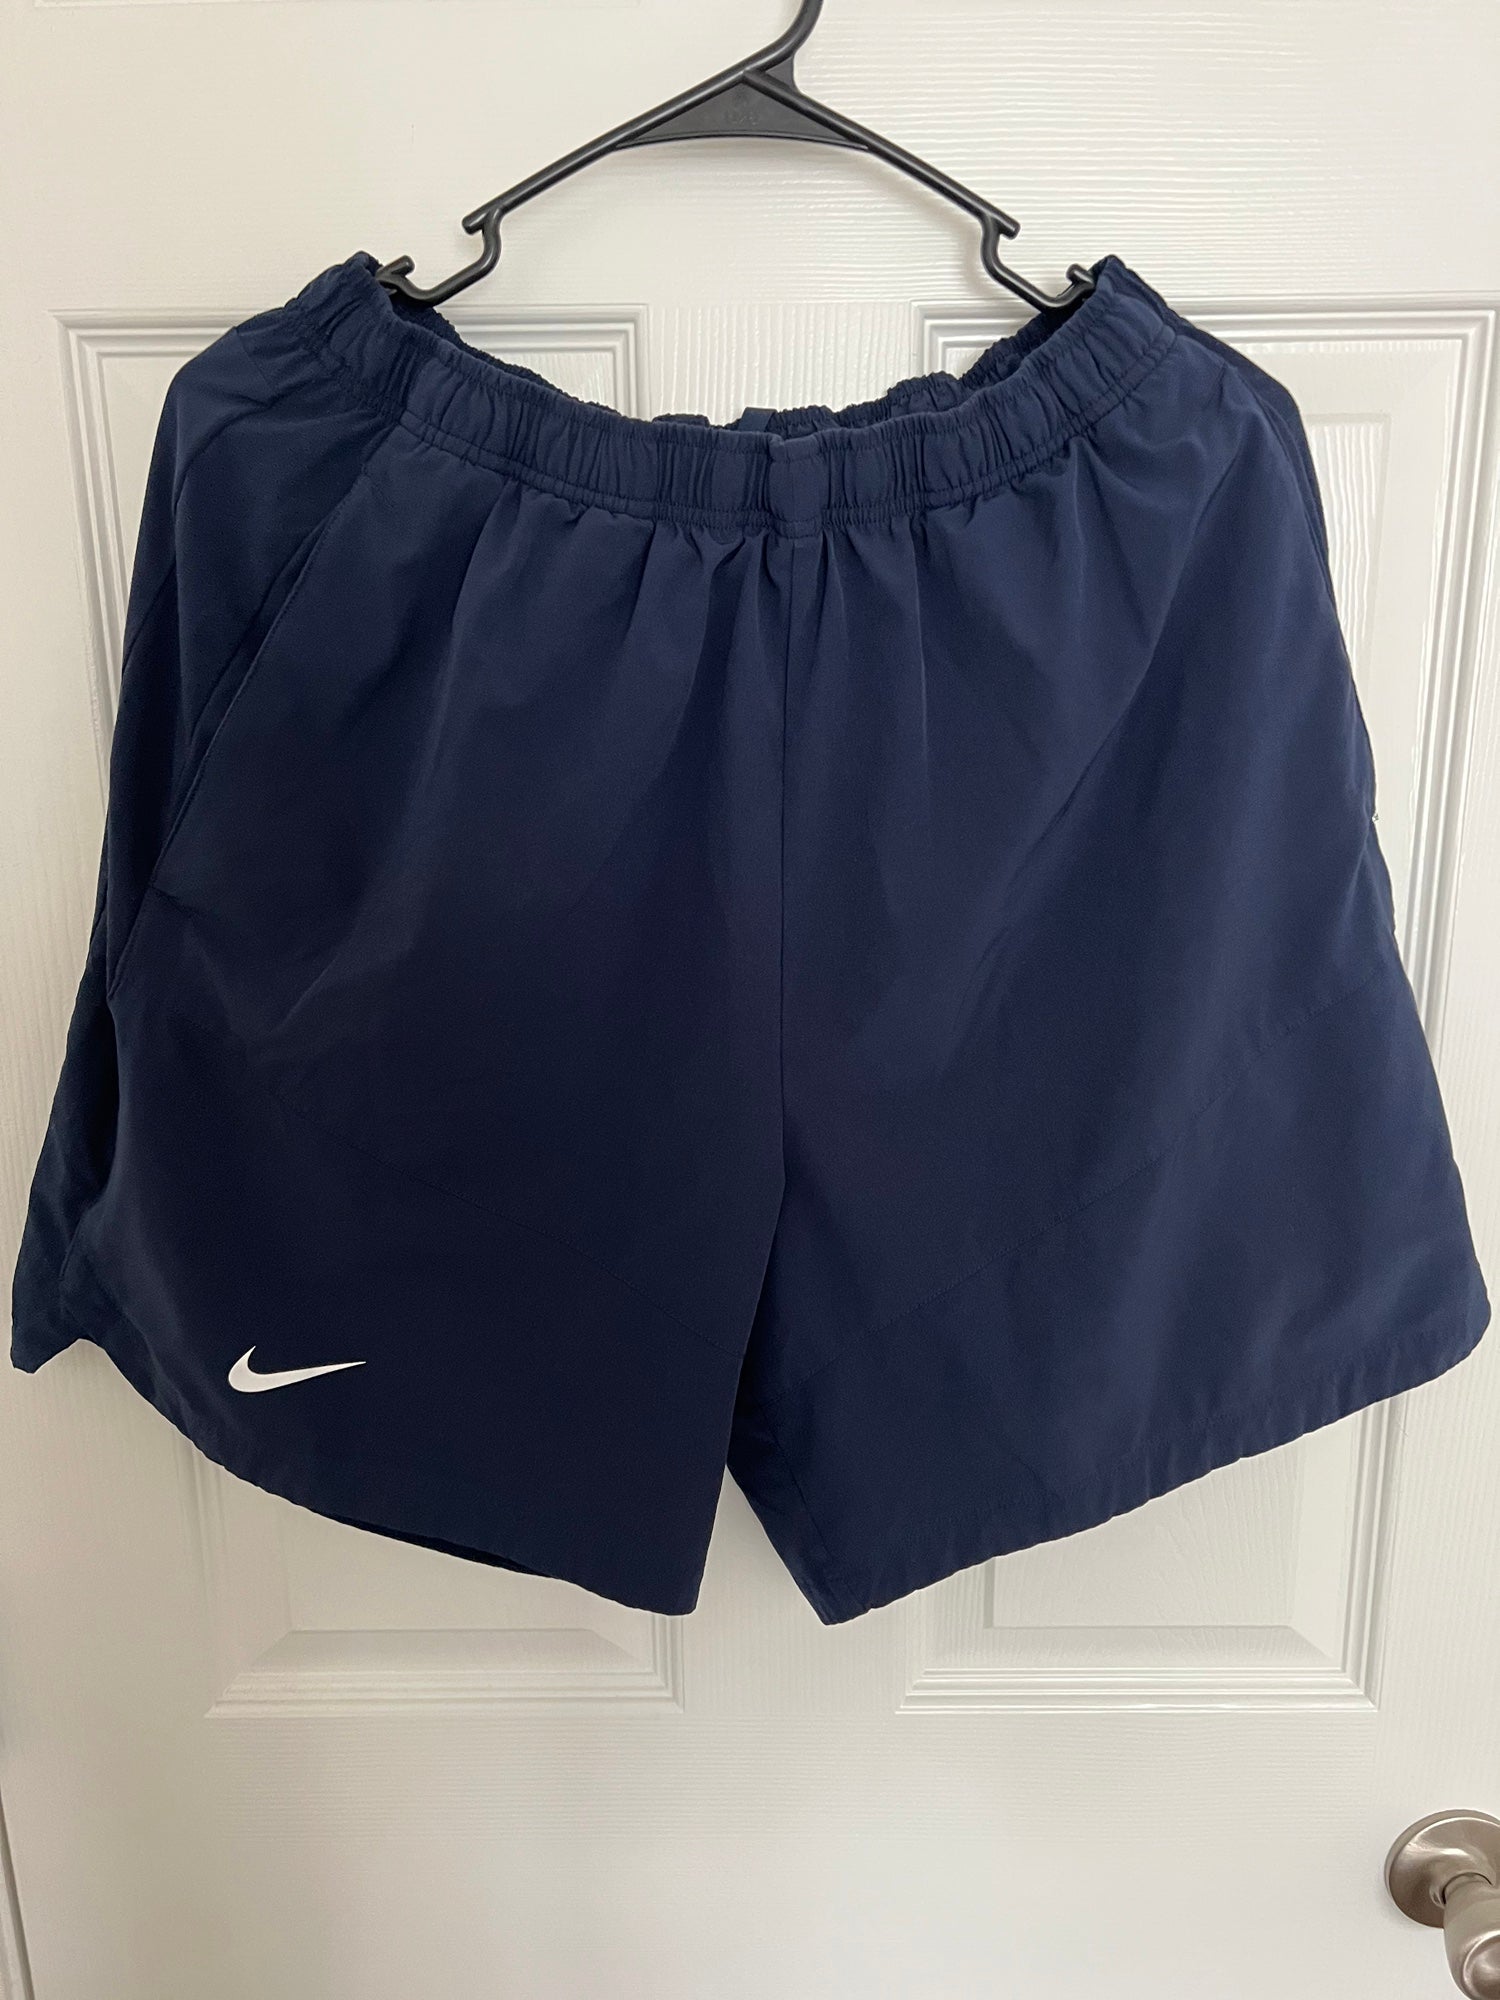 Nike L Shorts Navy Blue Athletic Active Pockets Active Wear, 42% OFF